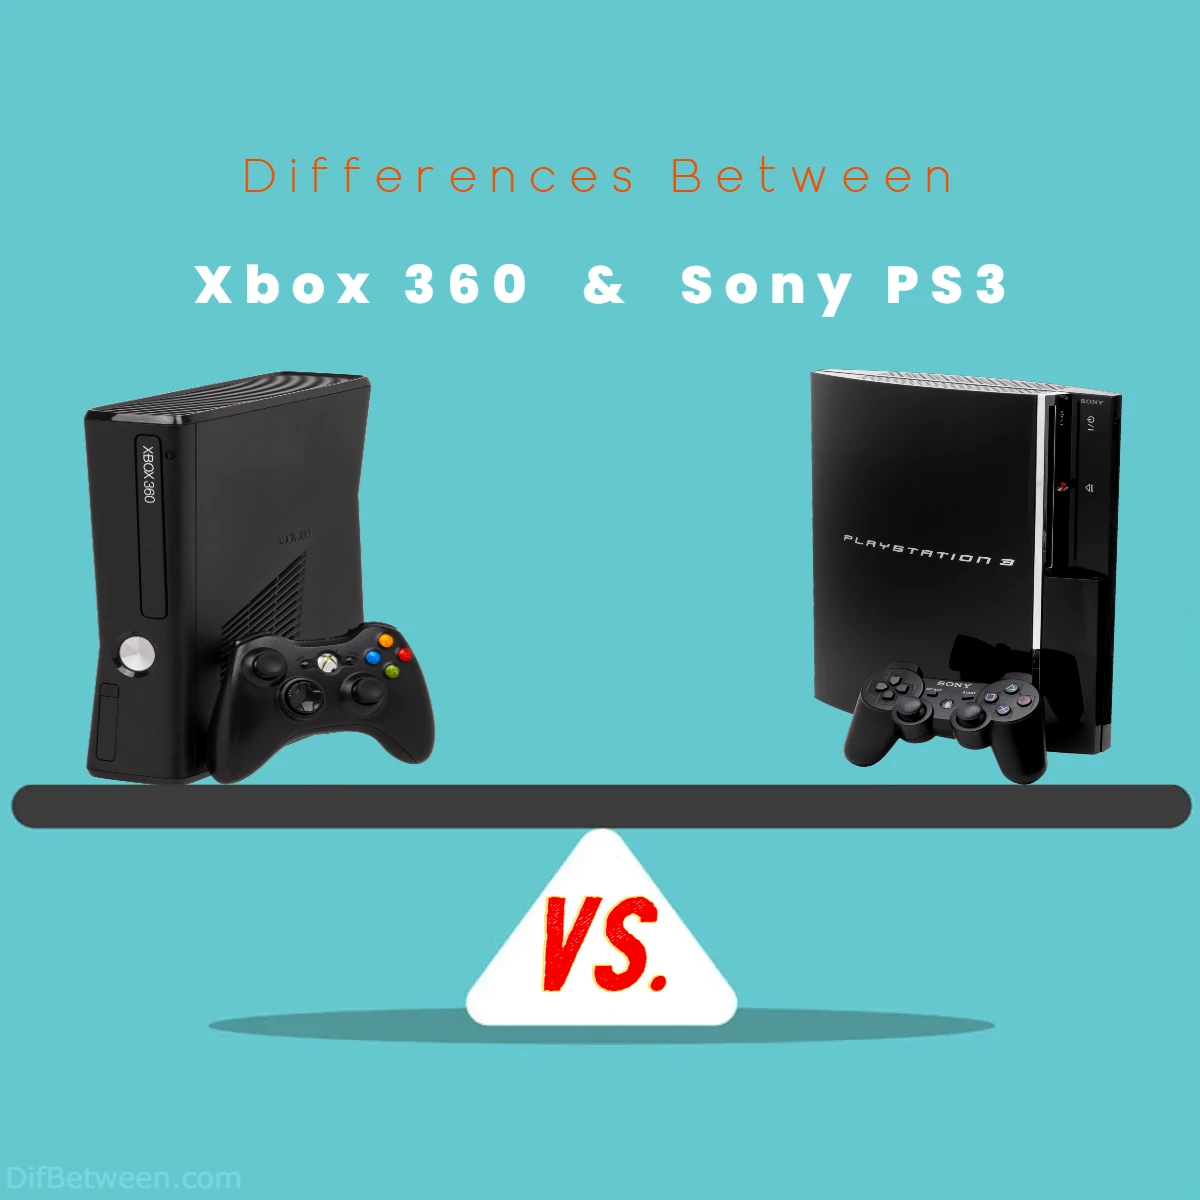 Differences Between Xbox 360 vs Sony PS3